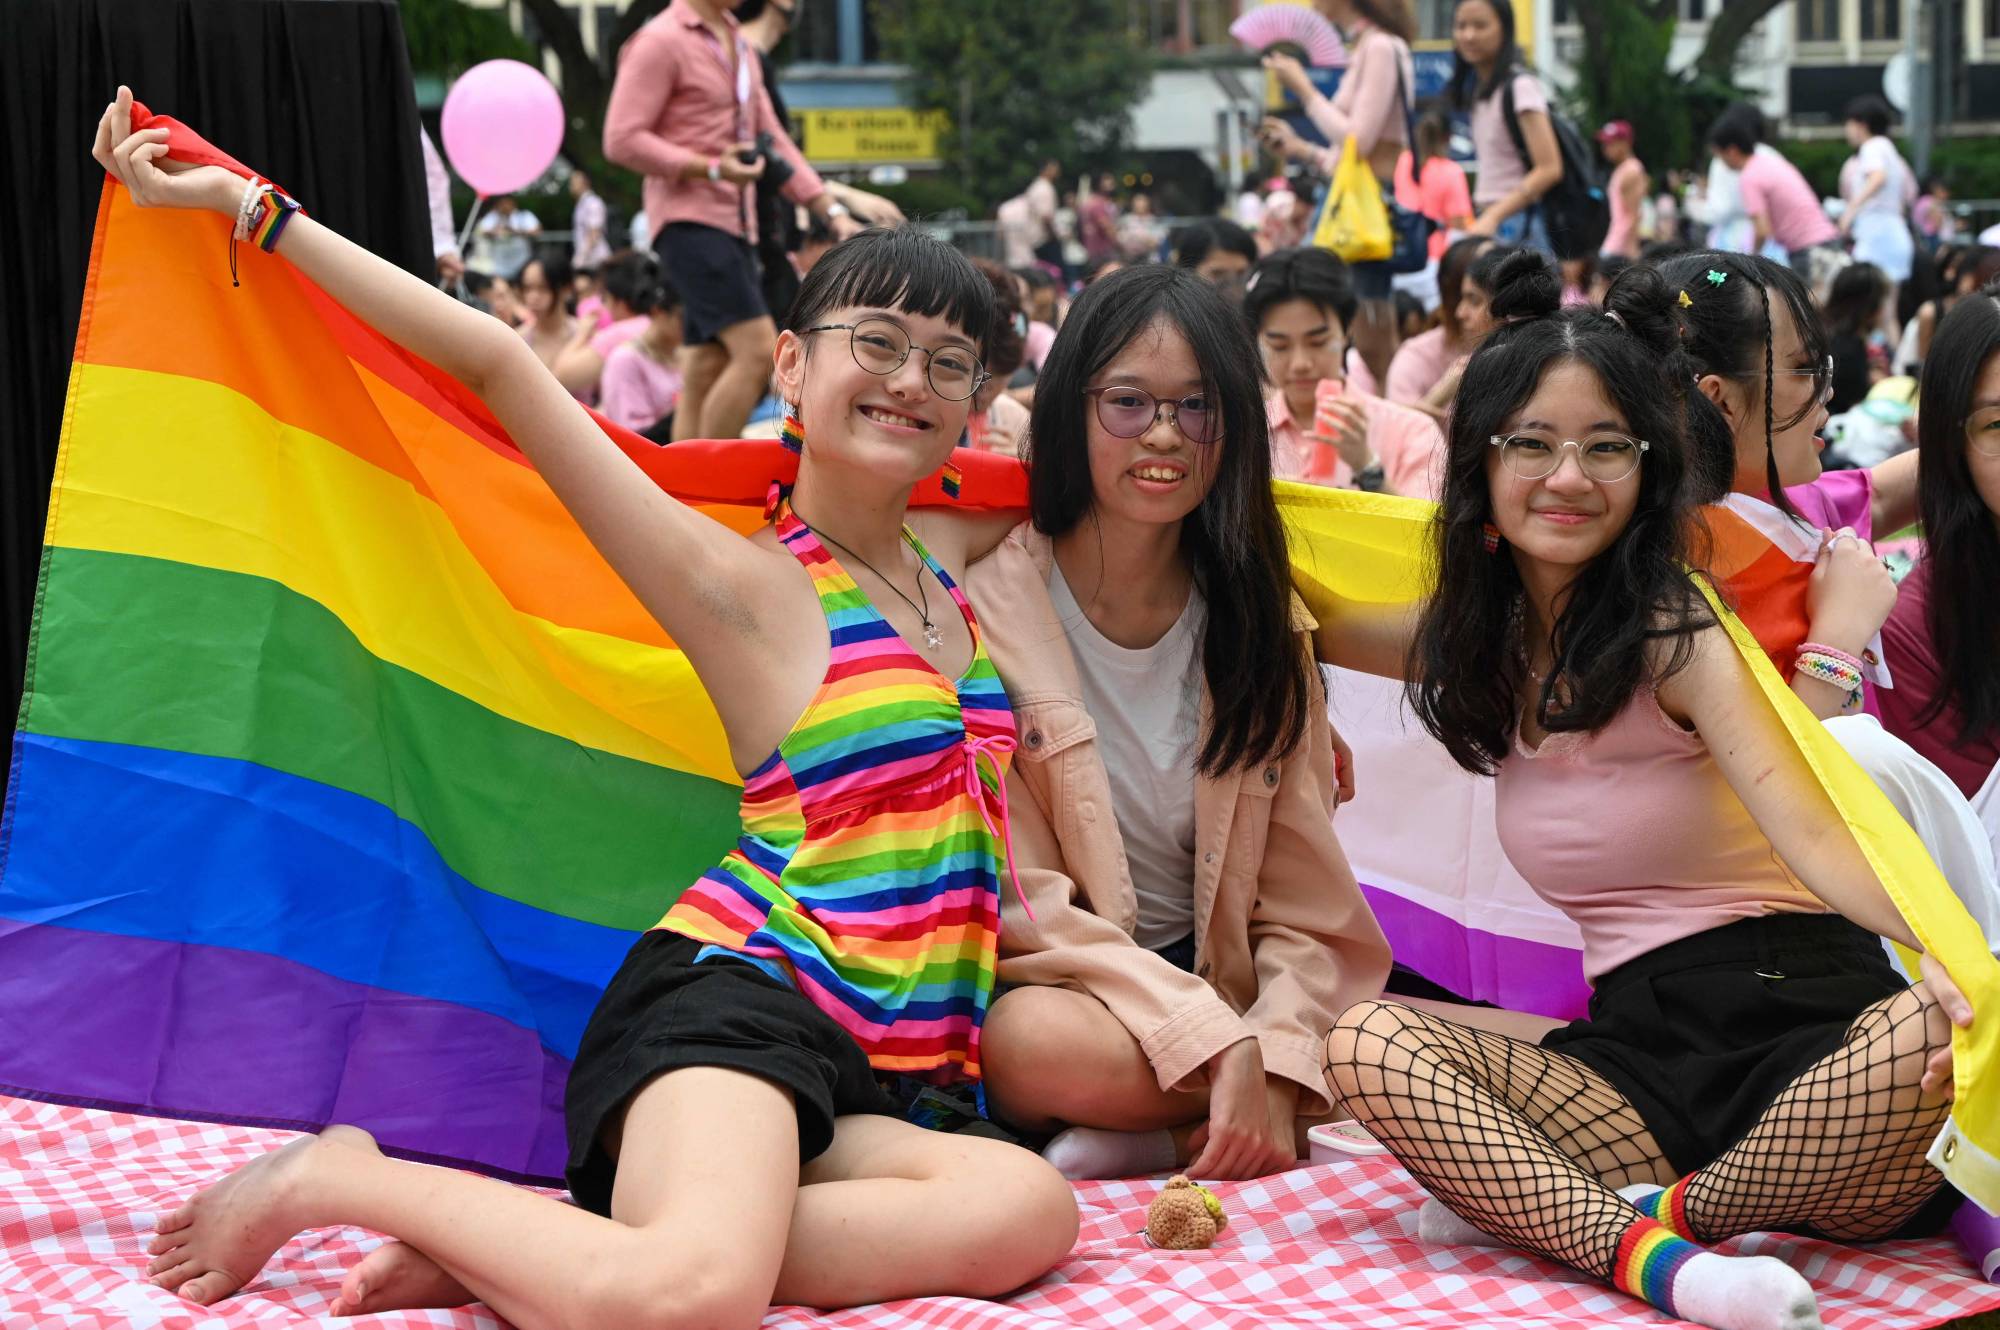 People attend an LGBTQ rally at Hong Lim Park in Singapore on Saturday. | AFP-JIJI